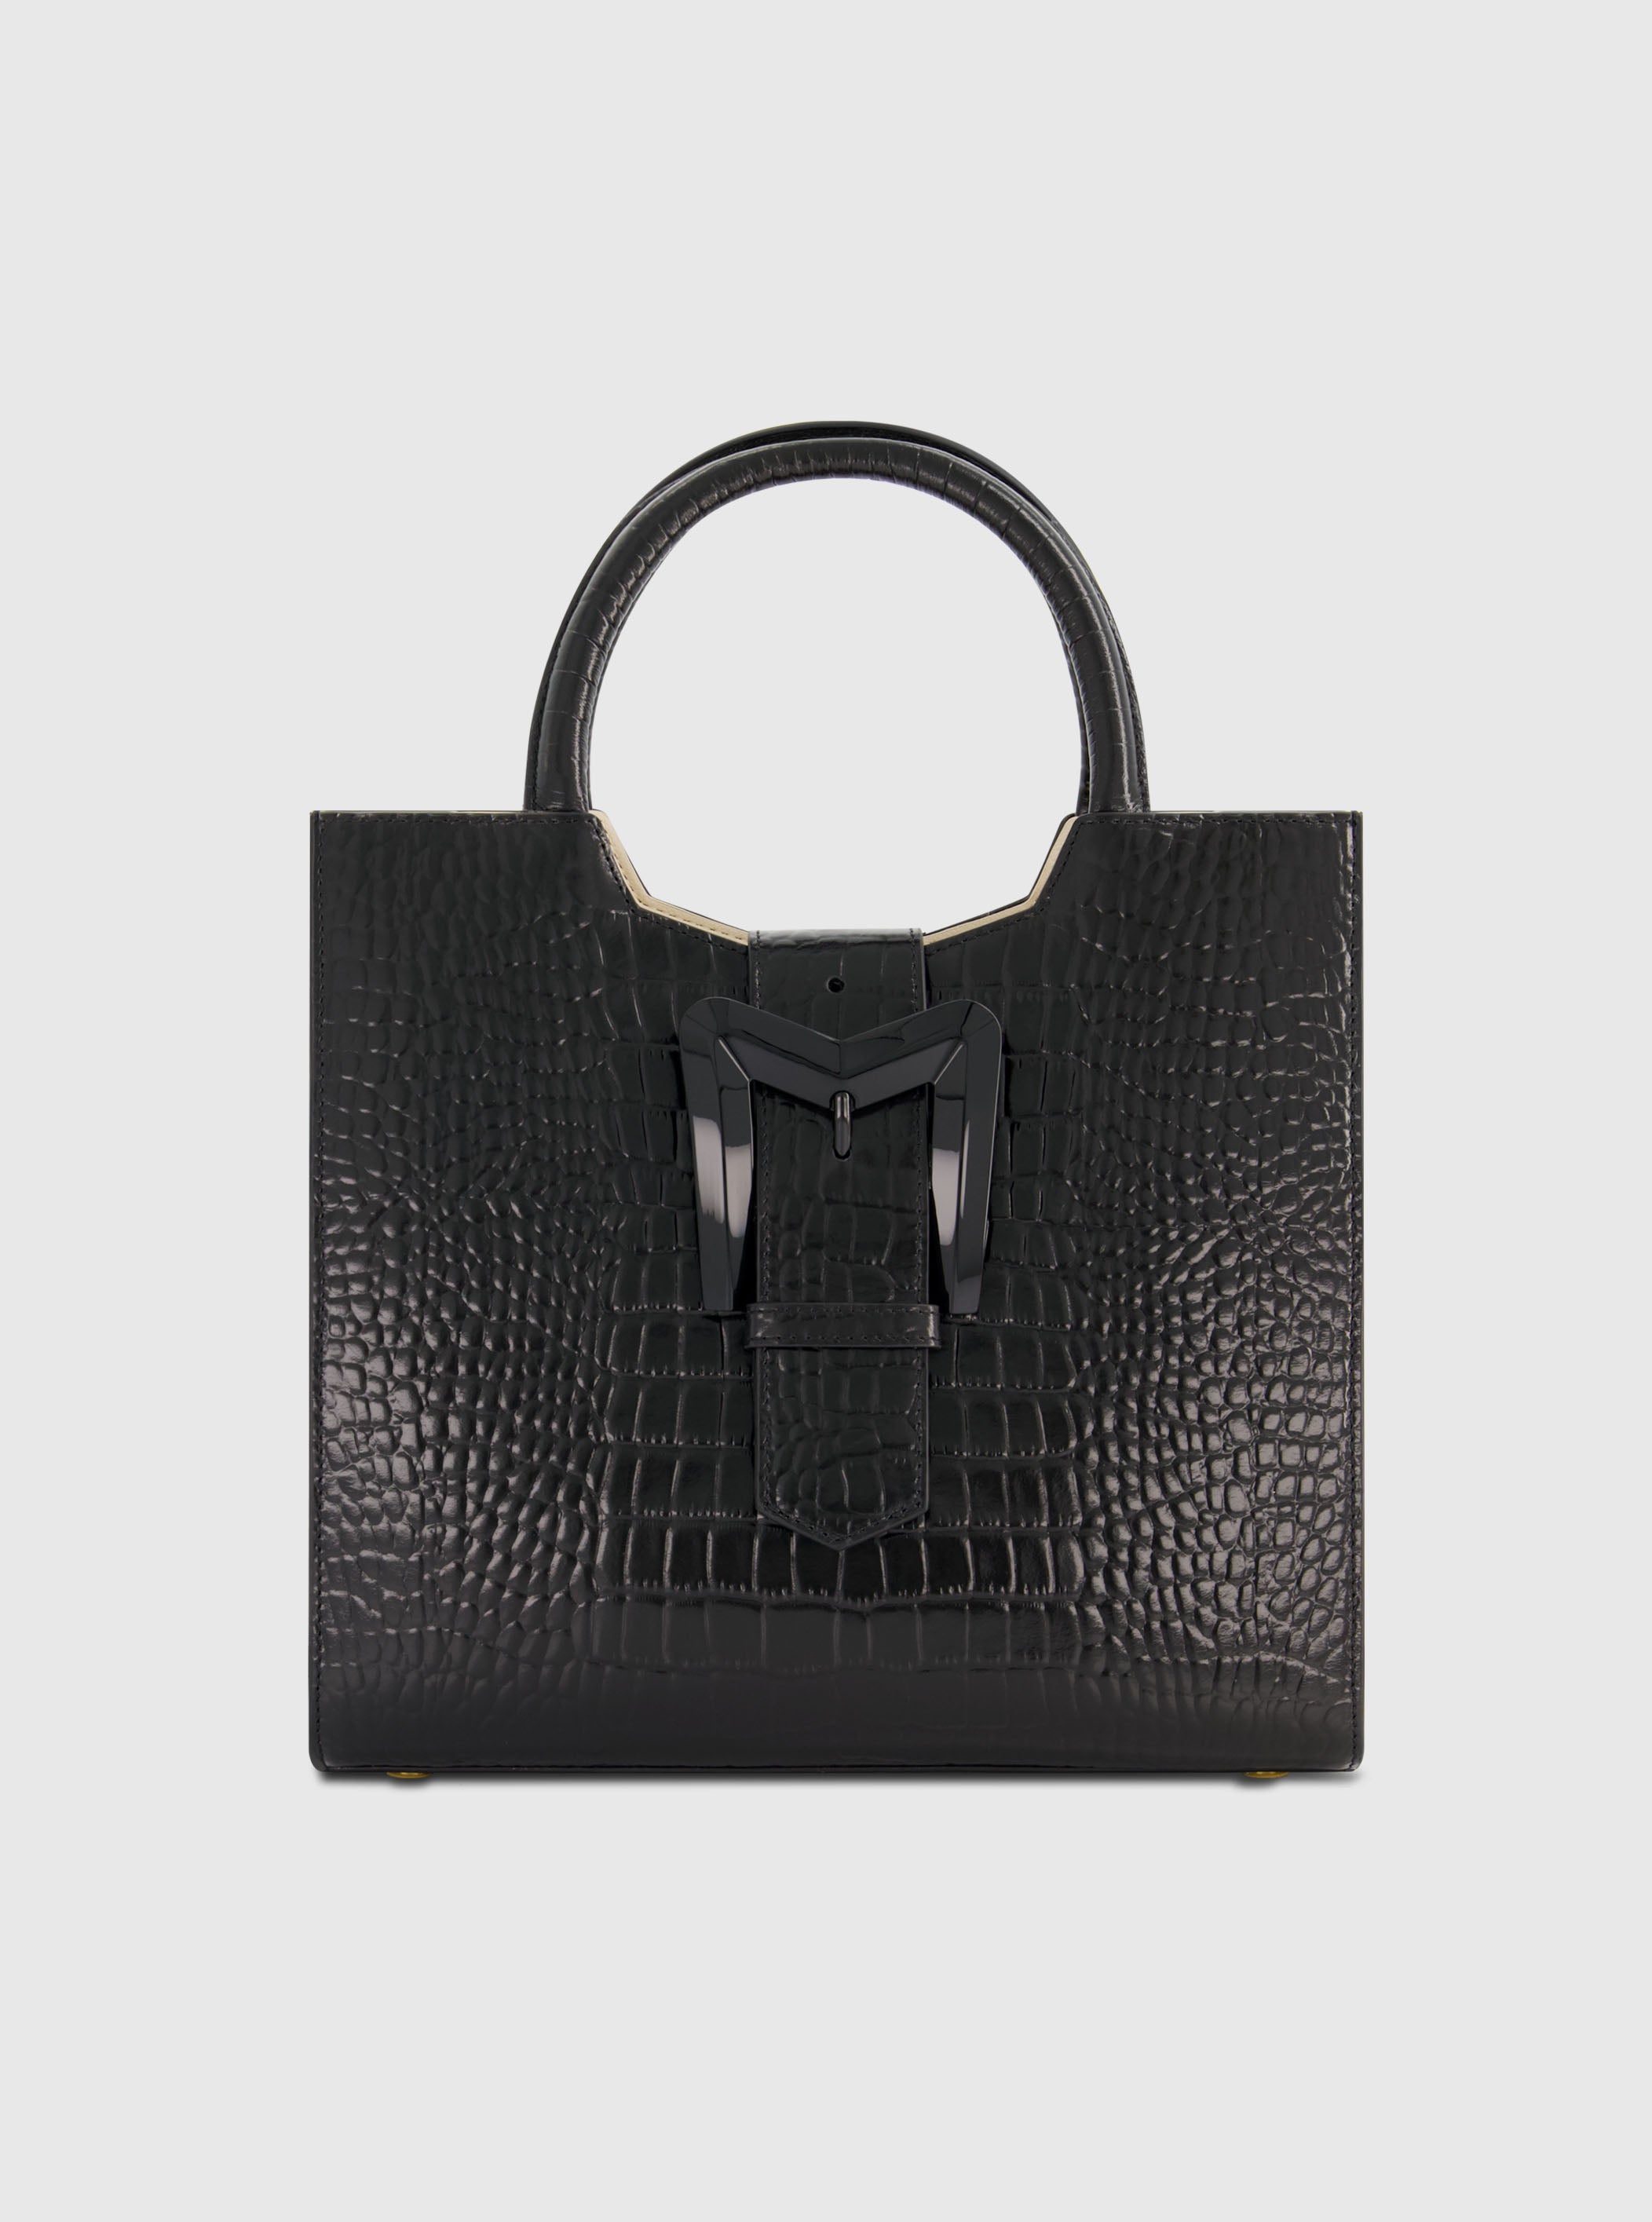 Buckled Medium Croco Black Leather Tote Bag with Detachable Strap